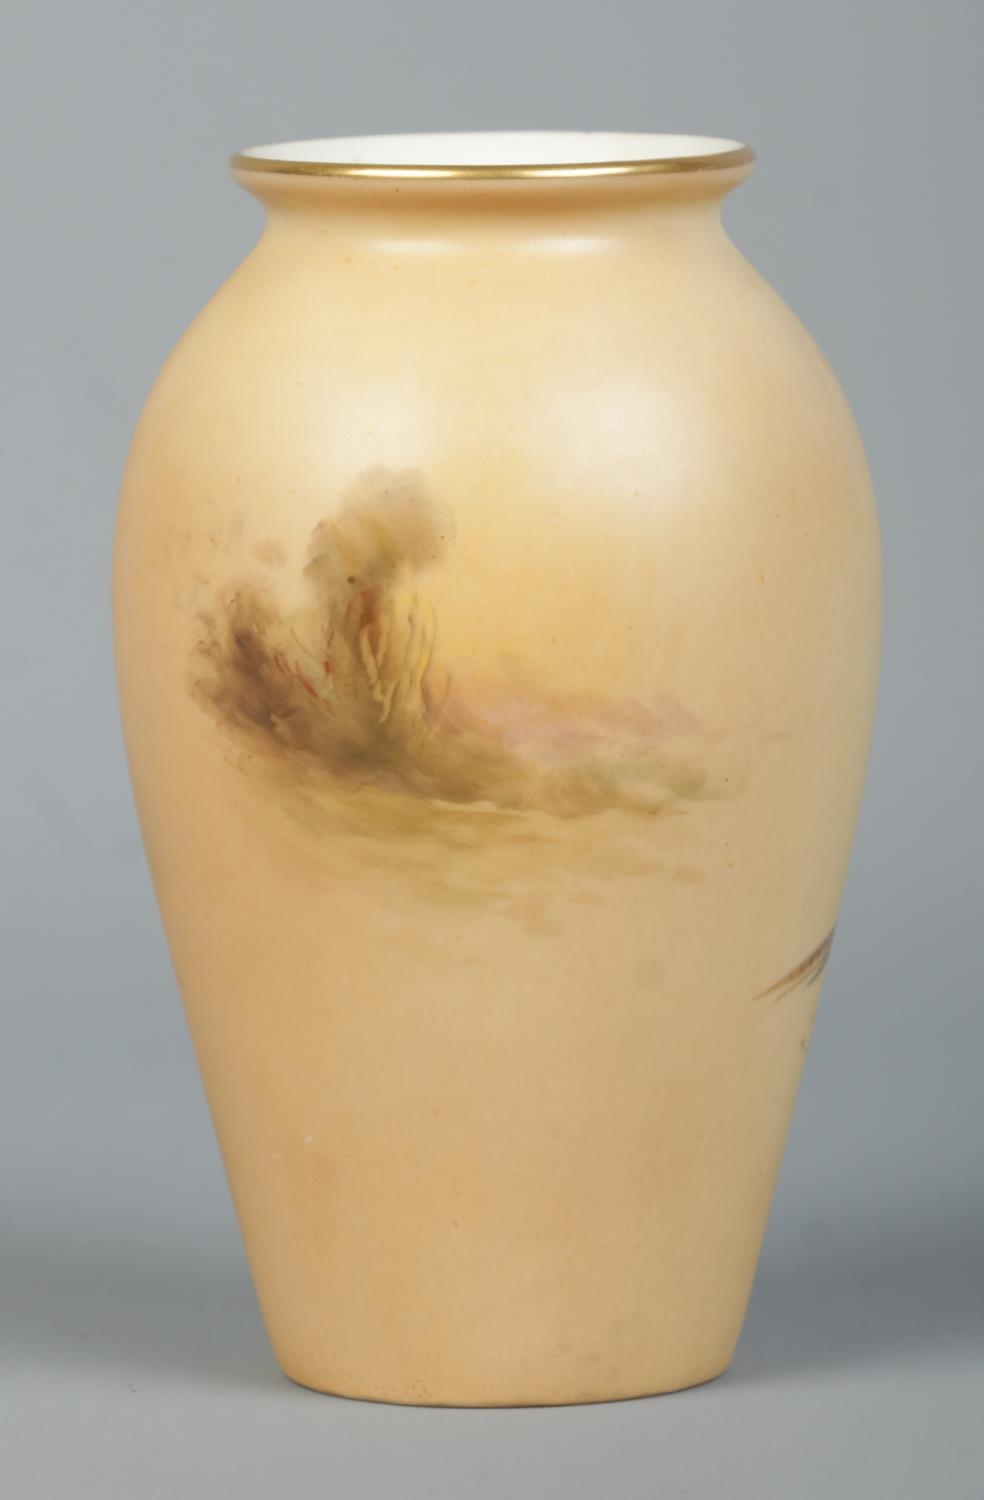 James Stinton for Royal Worcester, a porcelain vase with hand painted scene depicting pheasants in - Image 2 of 3